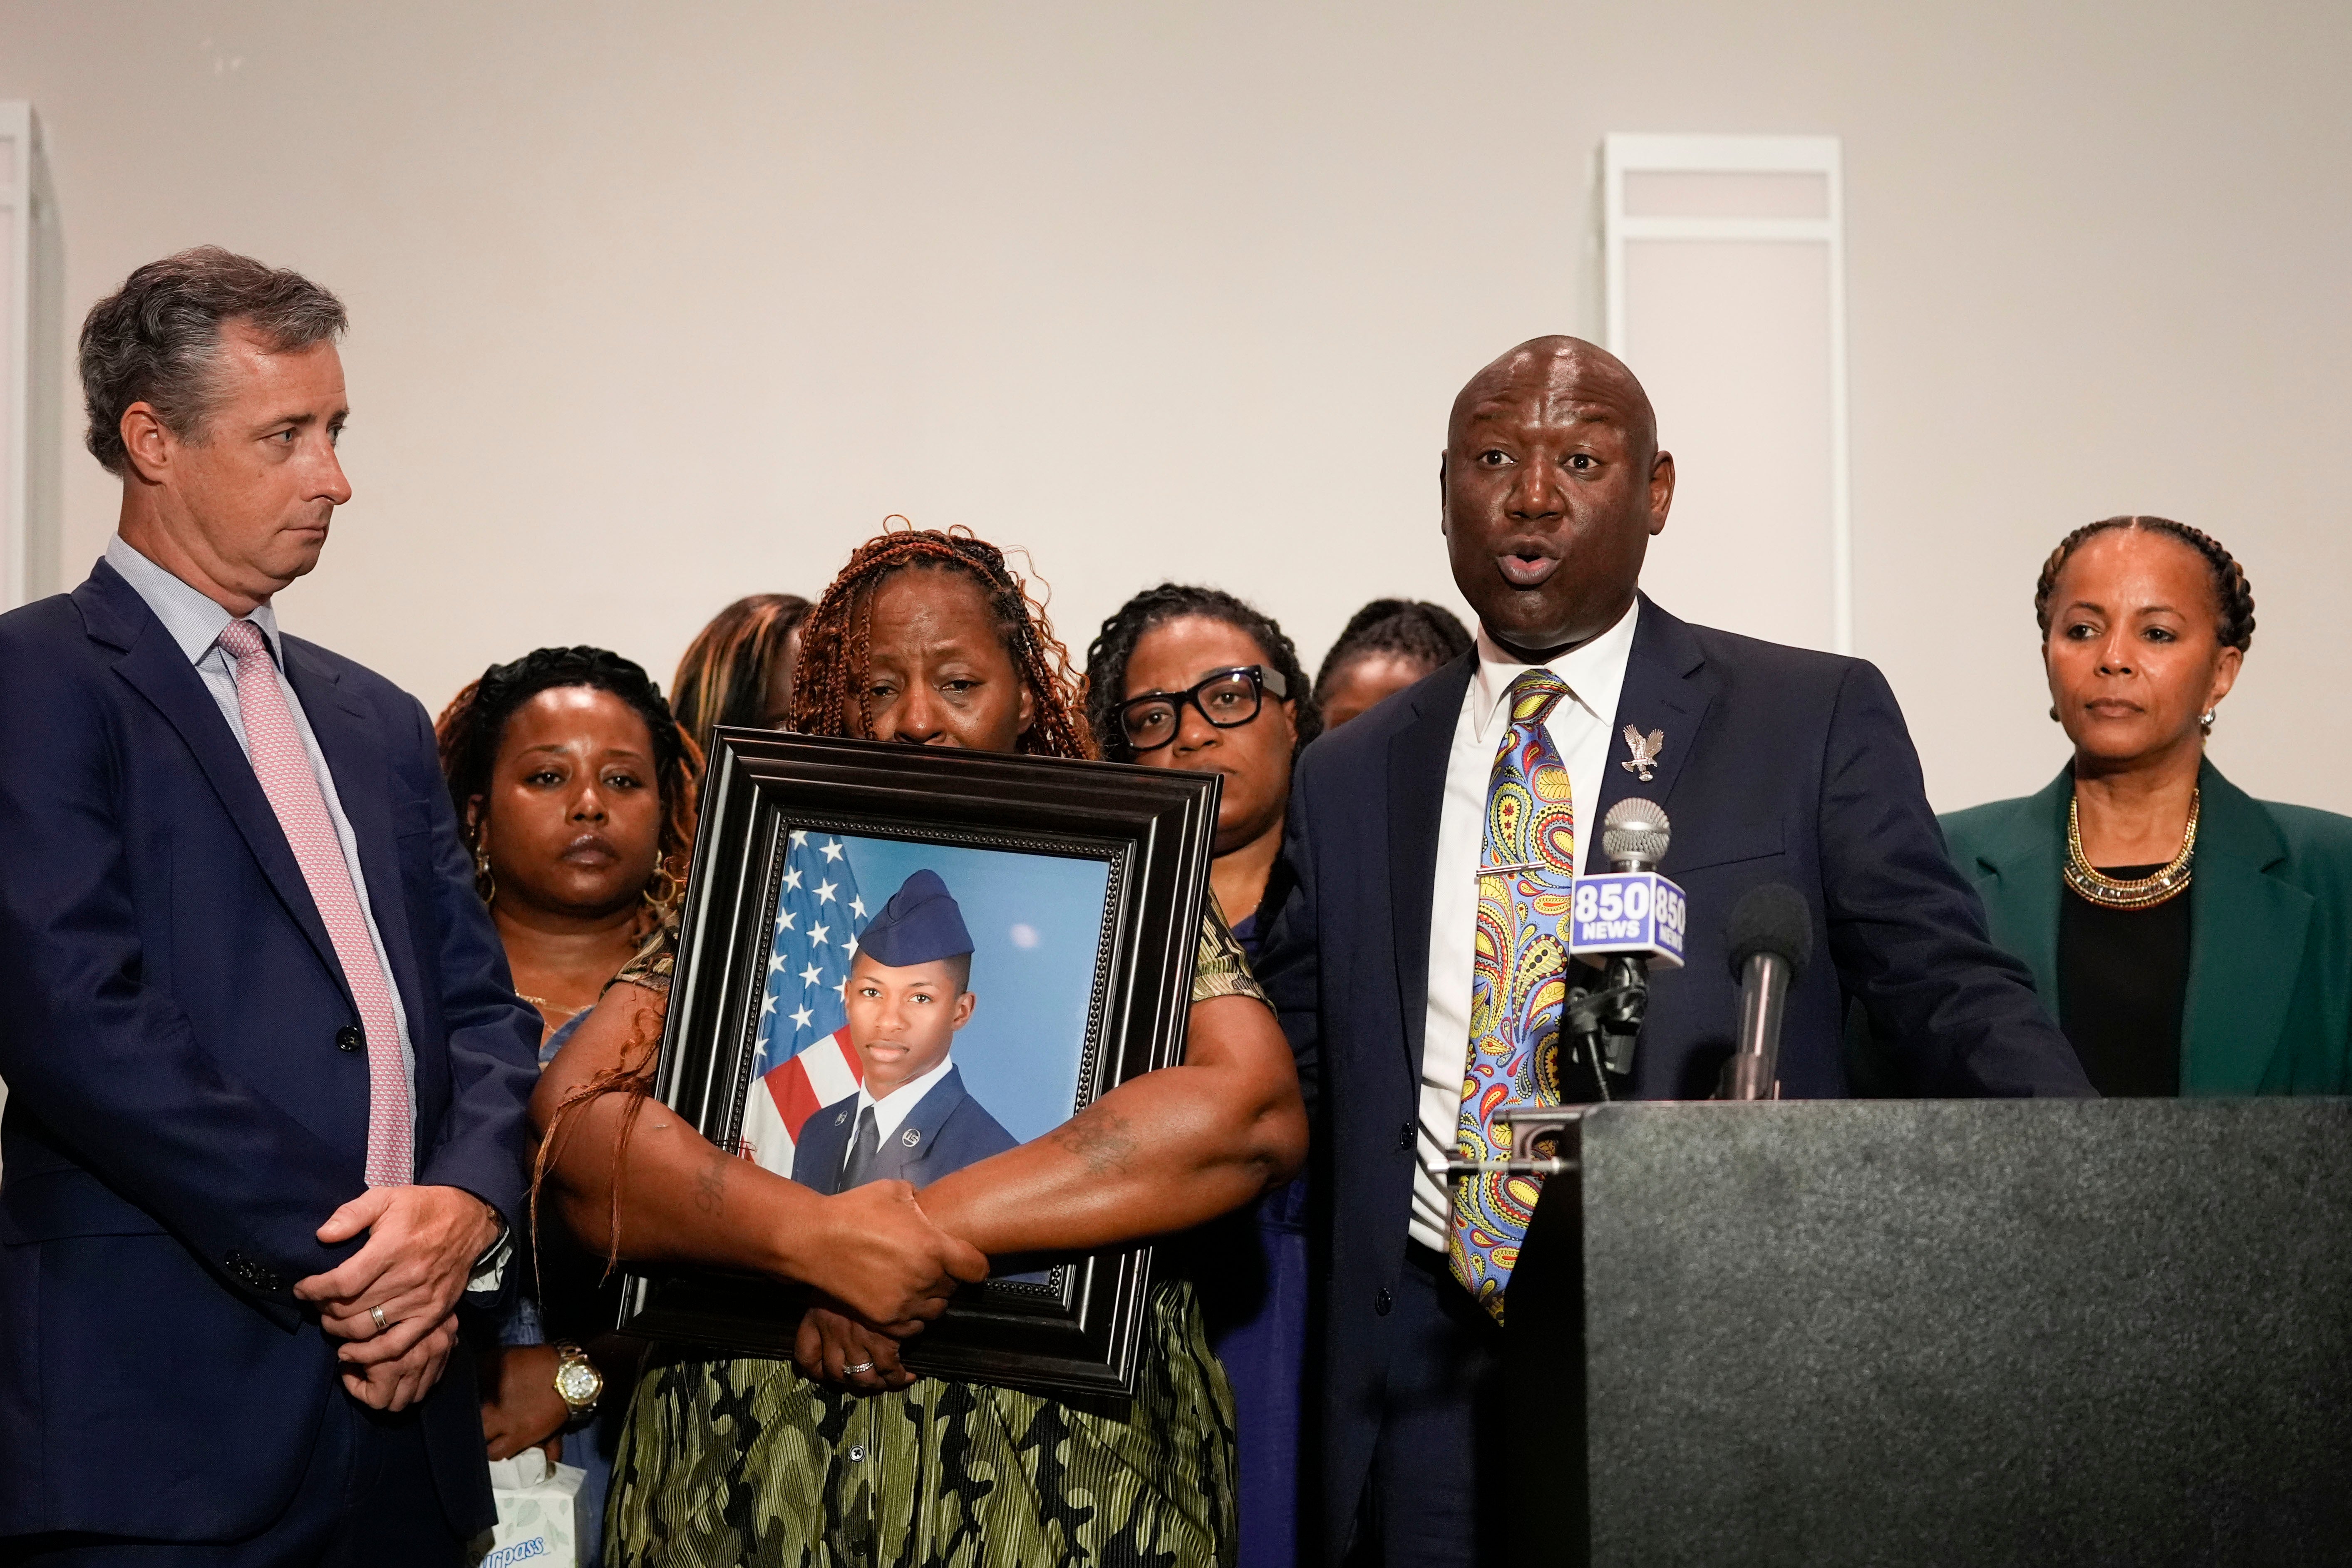 Chantimekki Fortson, mother of Roger Fortson, a US Air Force airman, holds a photo of her son during a news conference regarding his death, along with family and Ben Crump